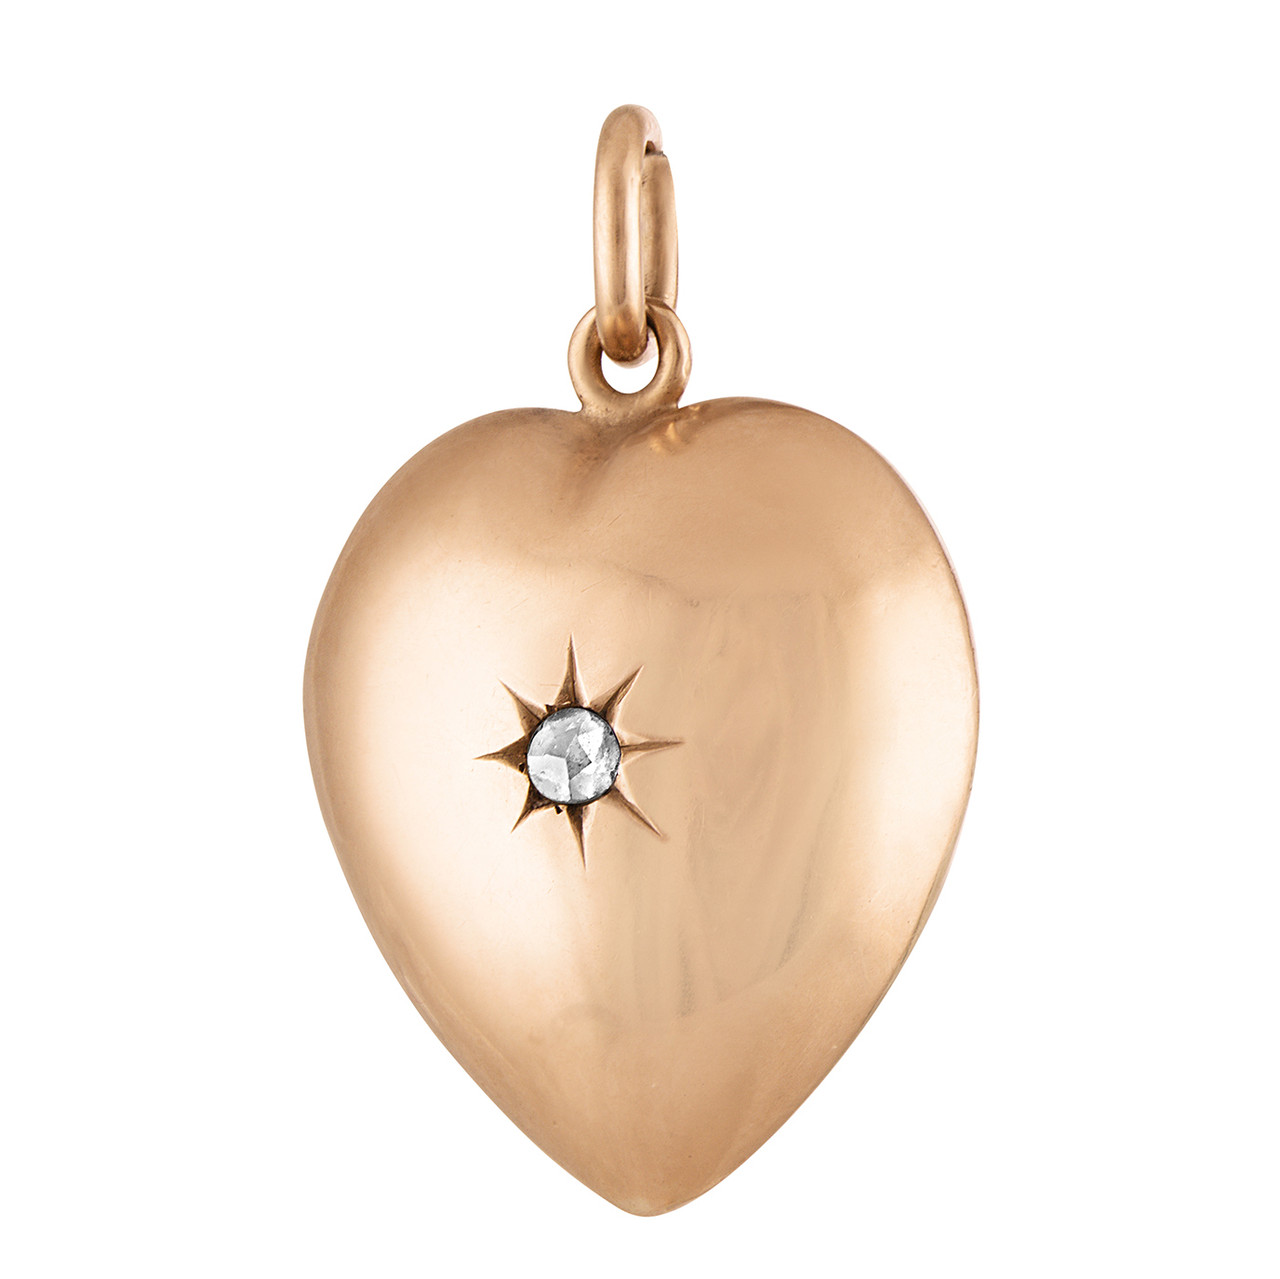 14K Yellow Gold Puff Heart Pendant Necklace with Diamond Star